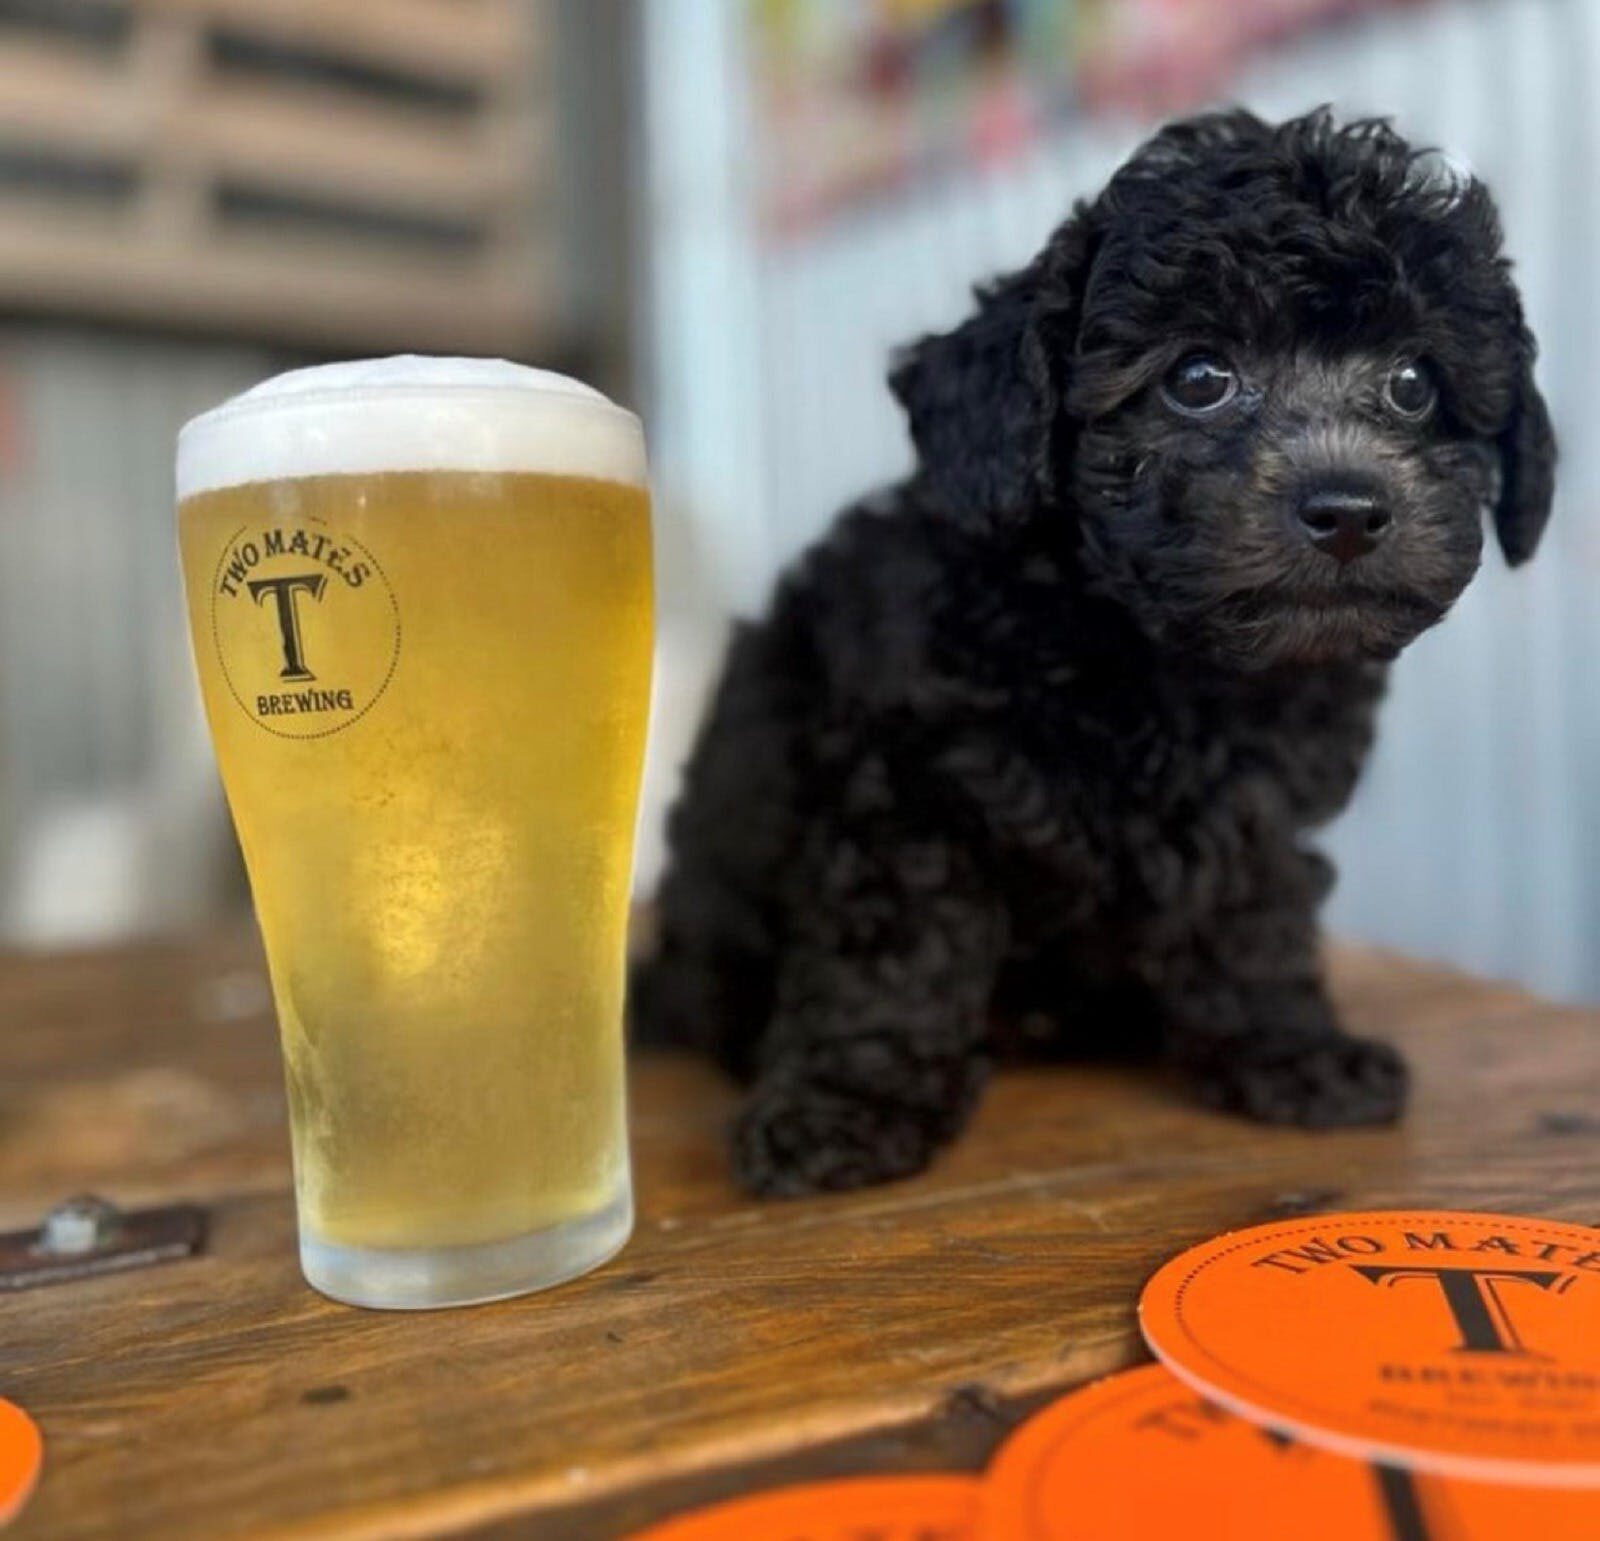 Dog and beer